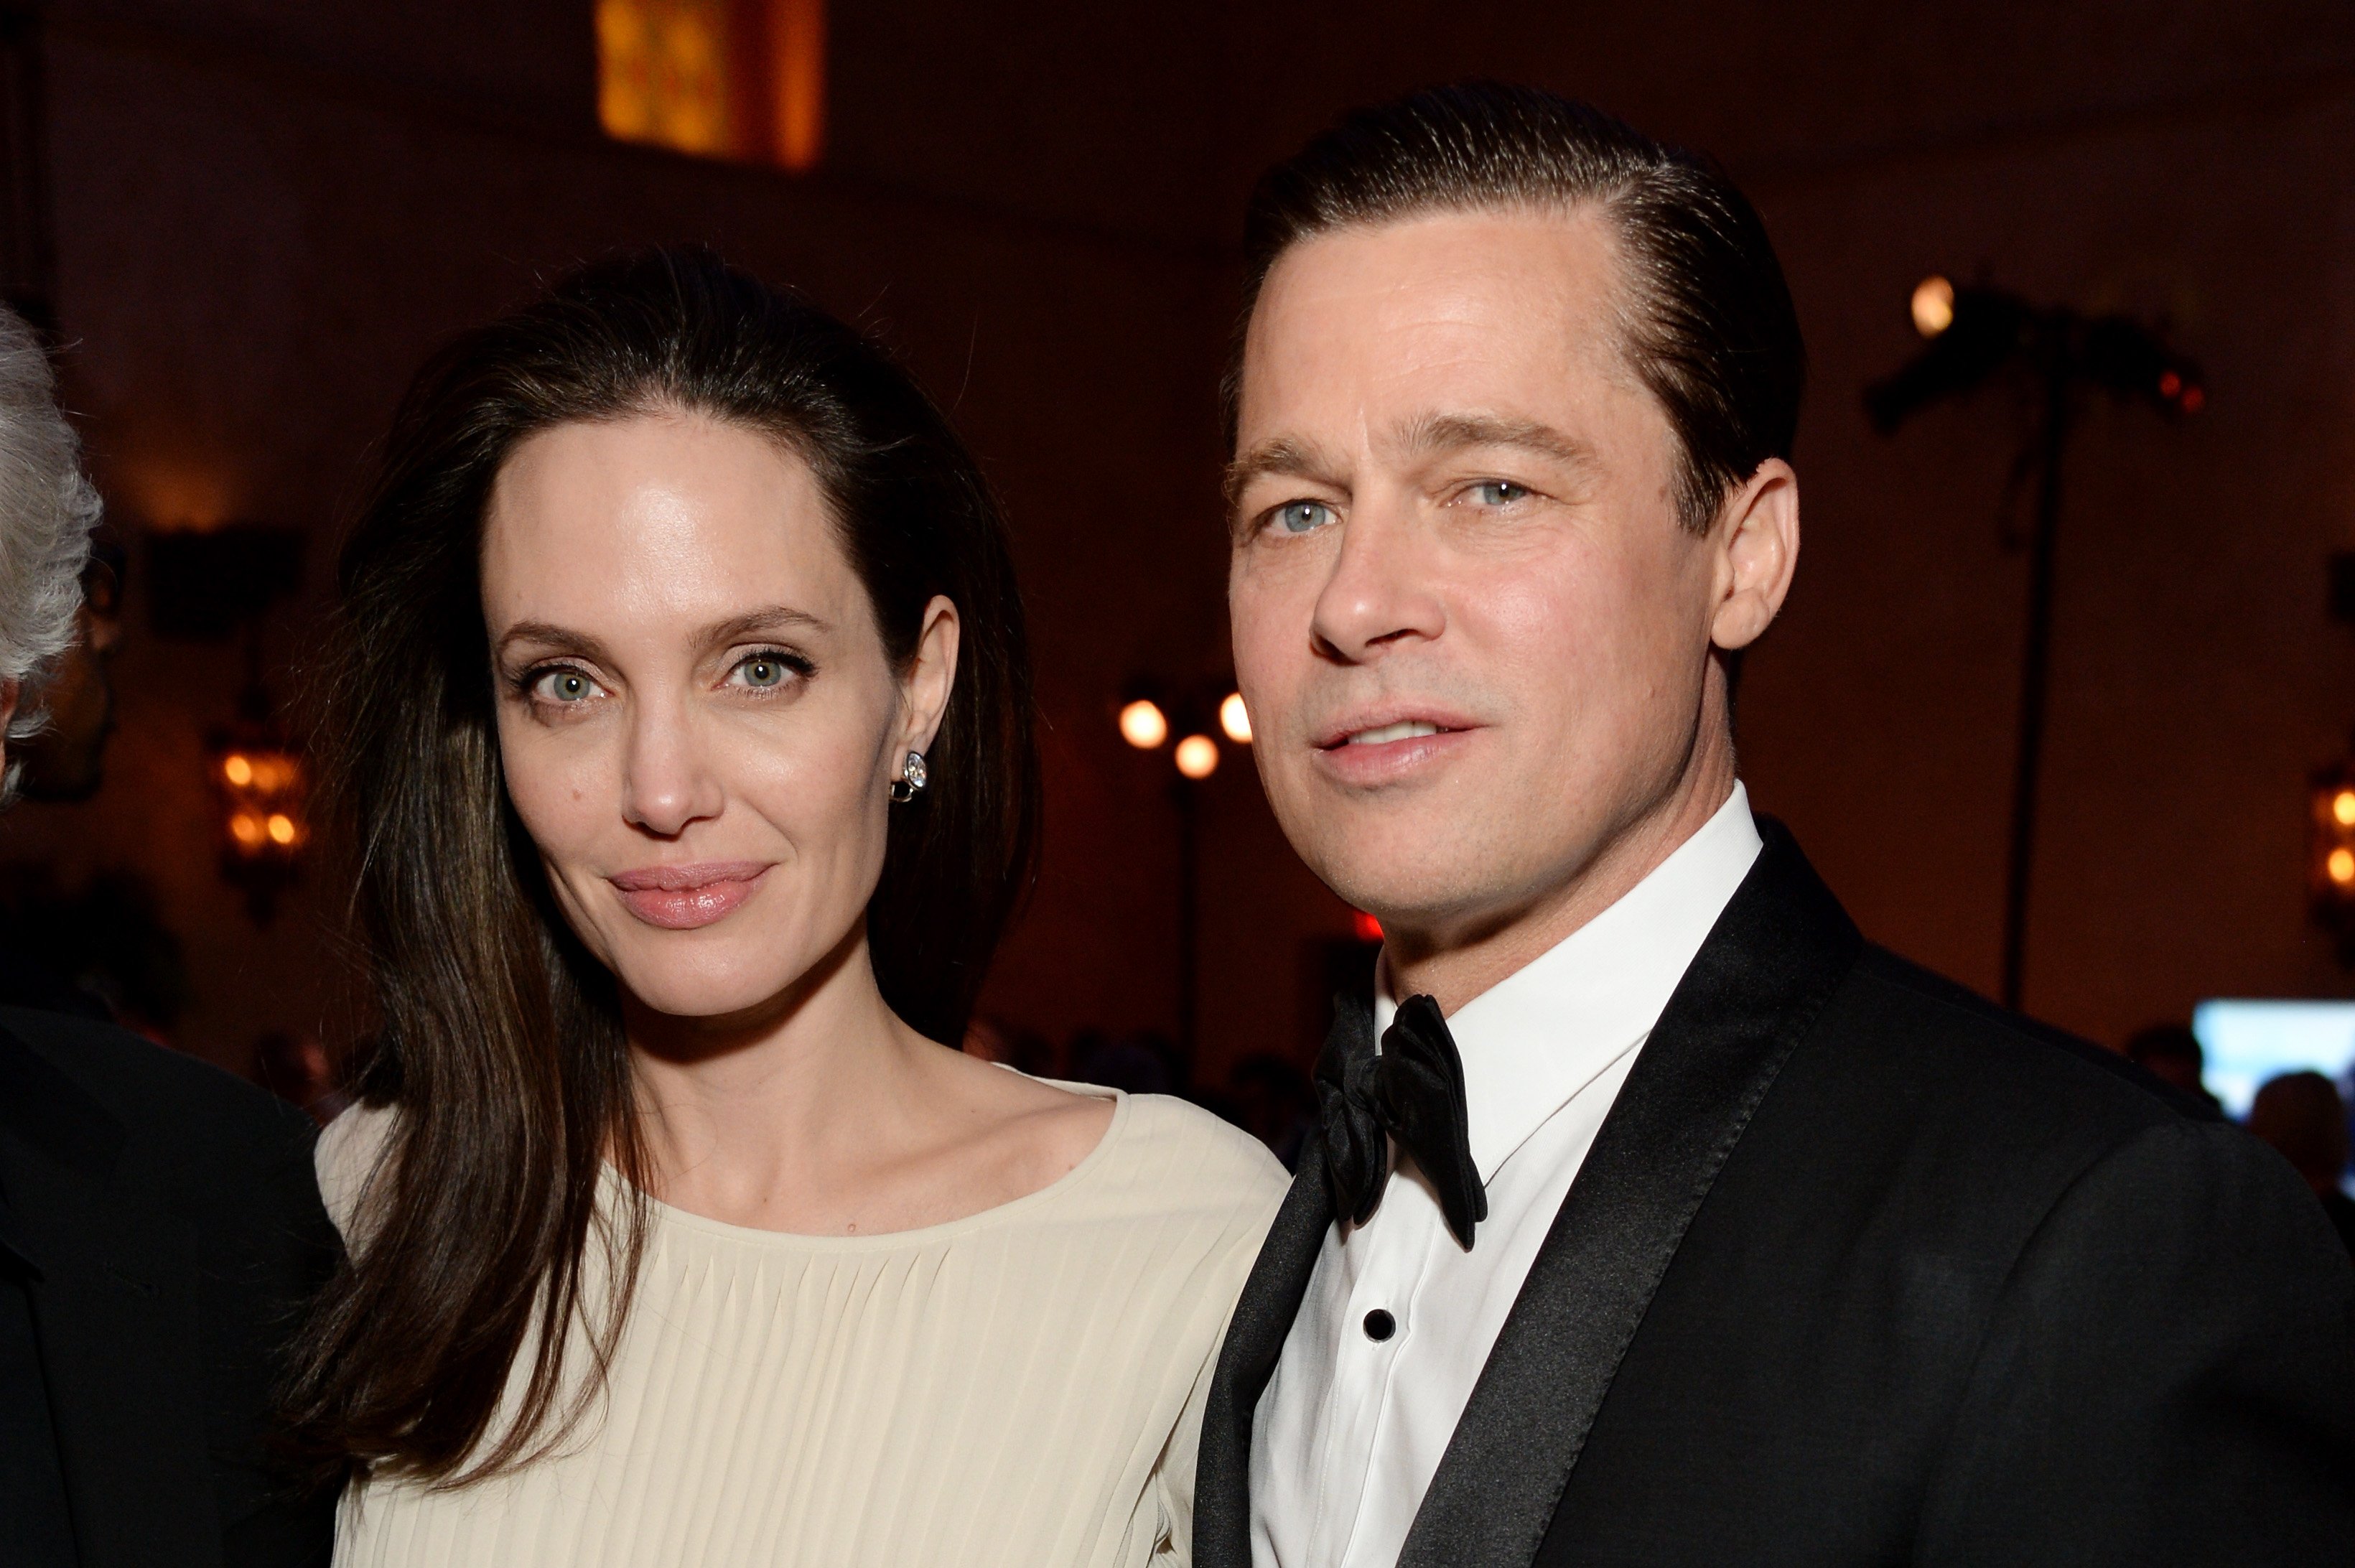 Angelina Jolie and Brad pitt attend the after party of the "By the Sea" premiere in Hollywood, California on November 5, 2015 | Photo: Getty Images